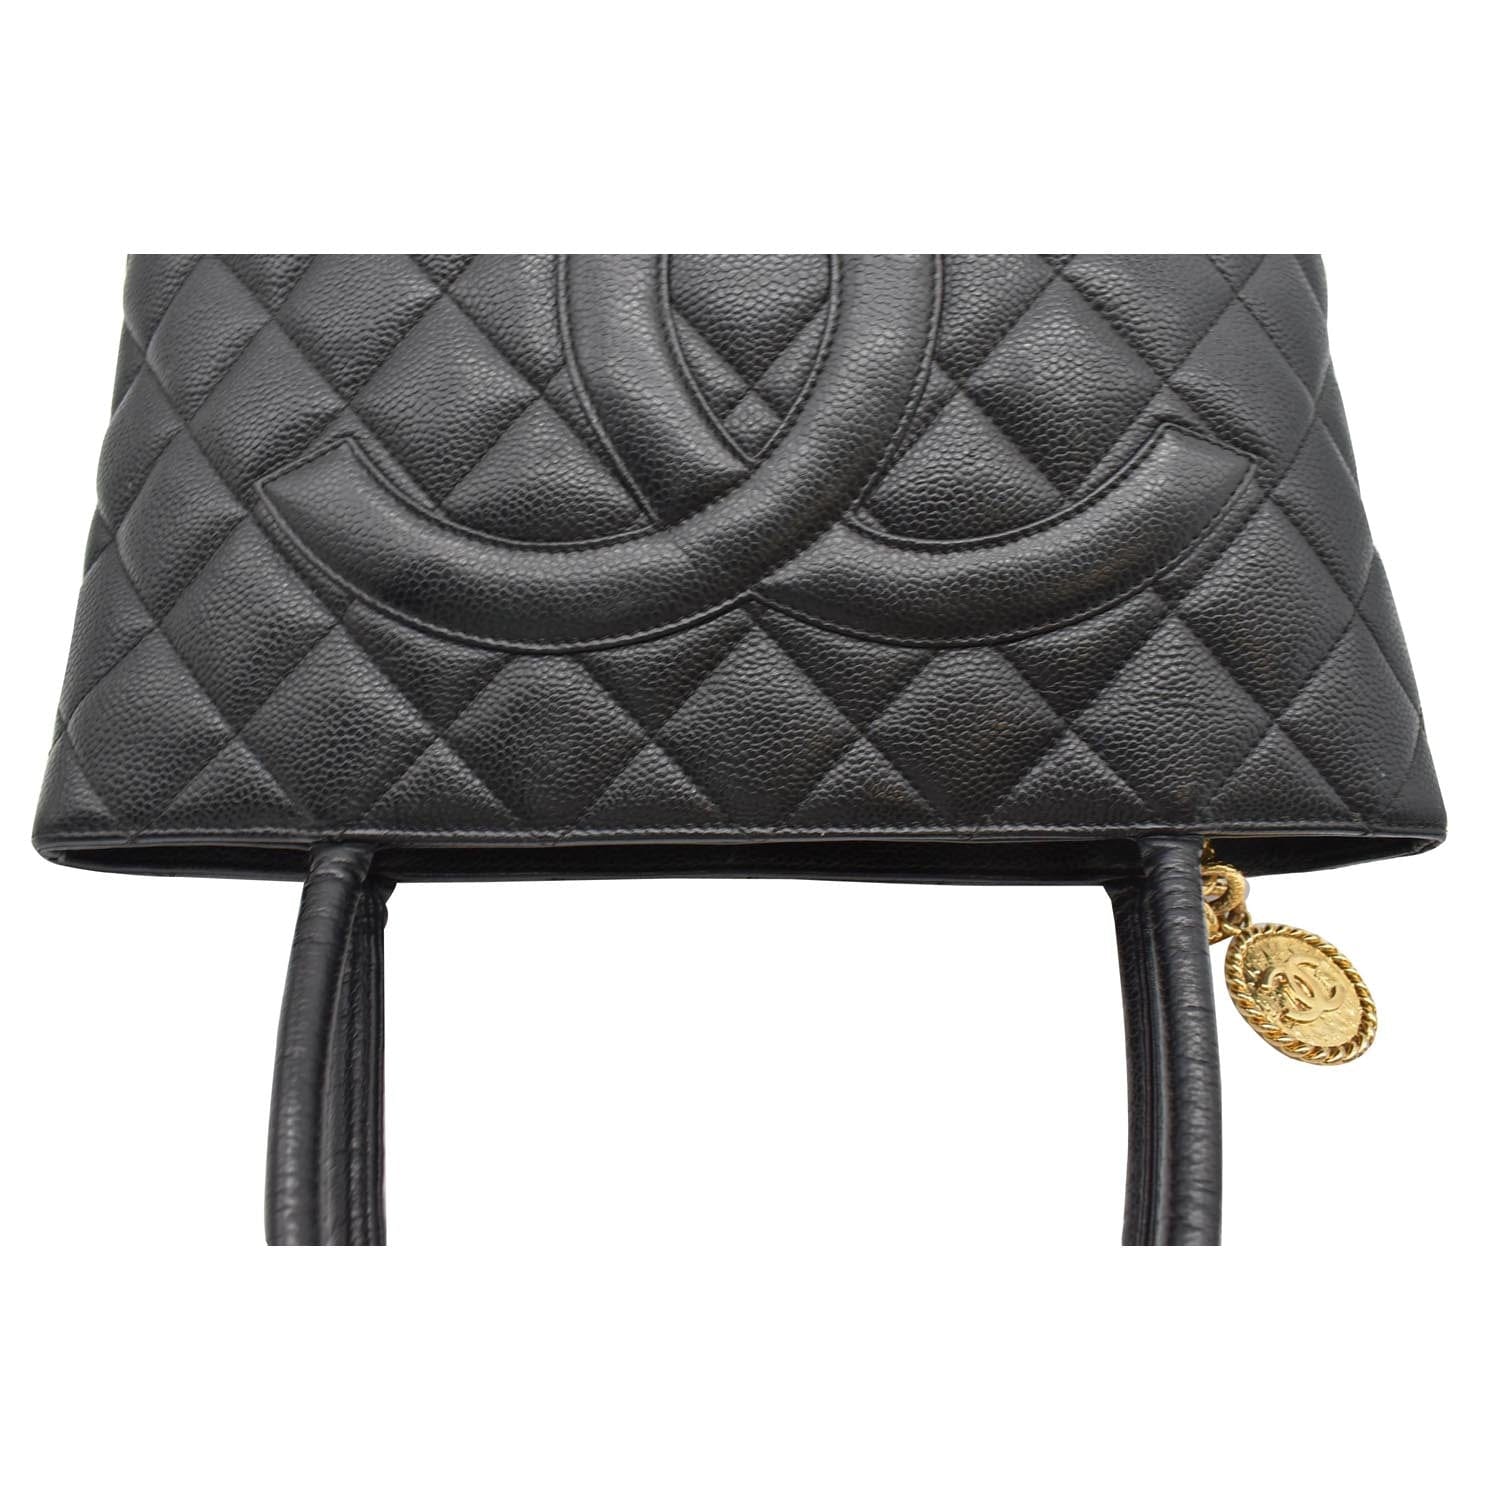 CHANEL, Bags, Chanel Caviar Quilted Medallion Tote Black